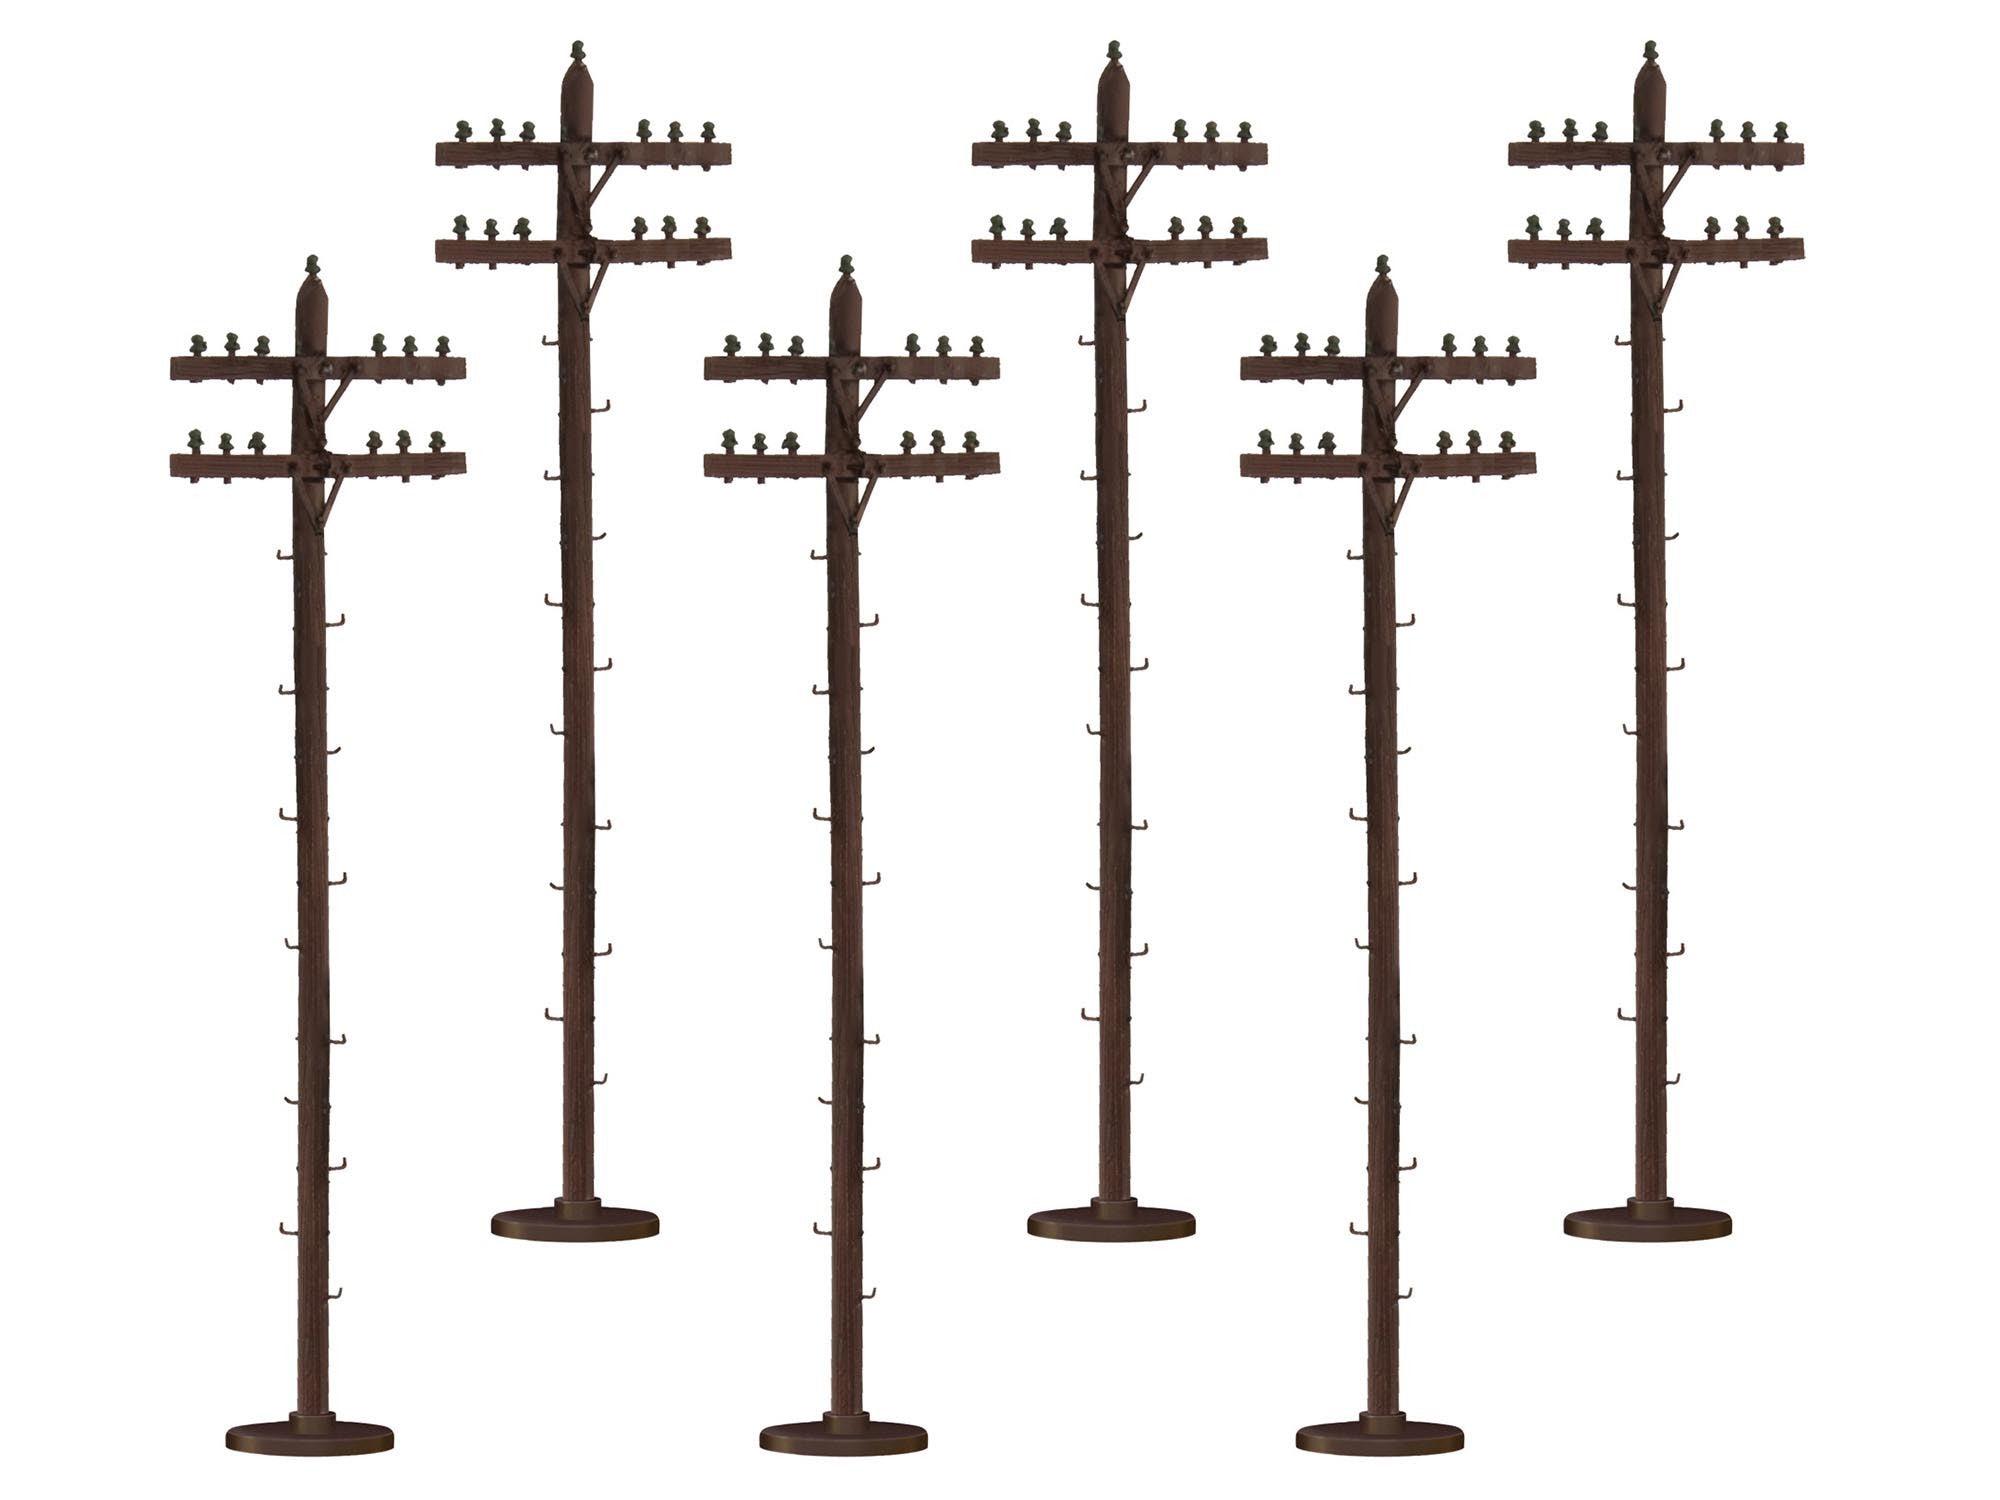 Lionel 6-37851 - Standard Telephone Poles (6-Pack)